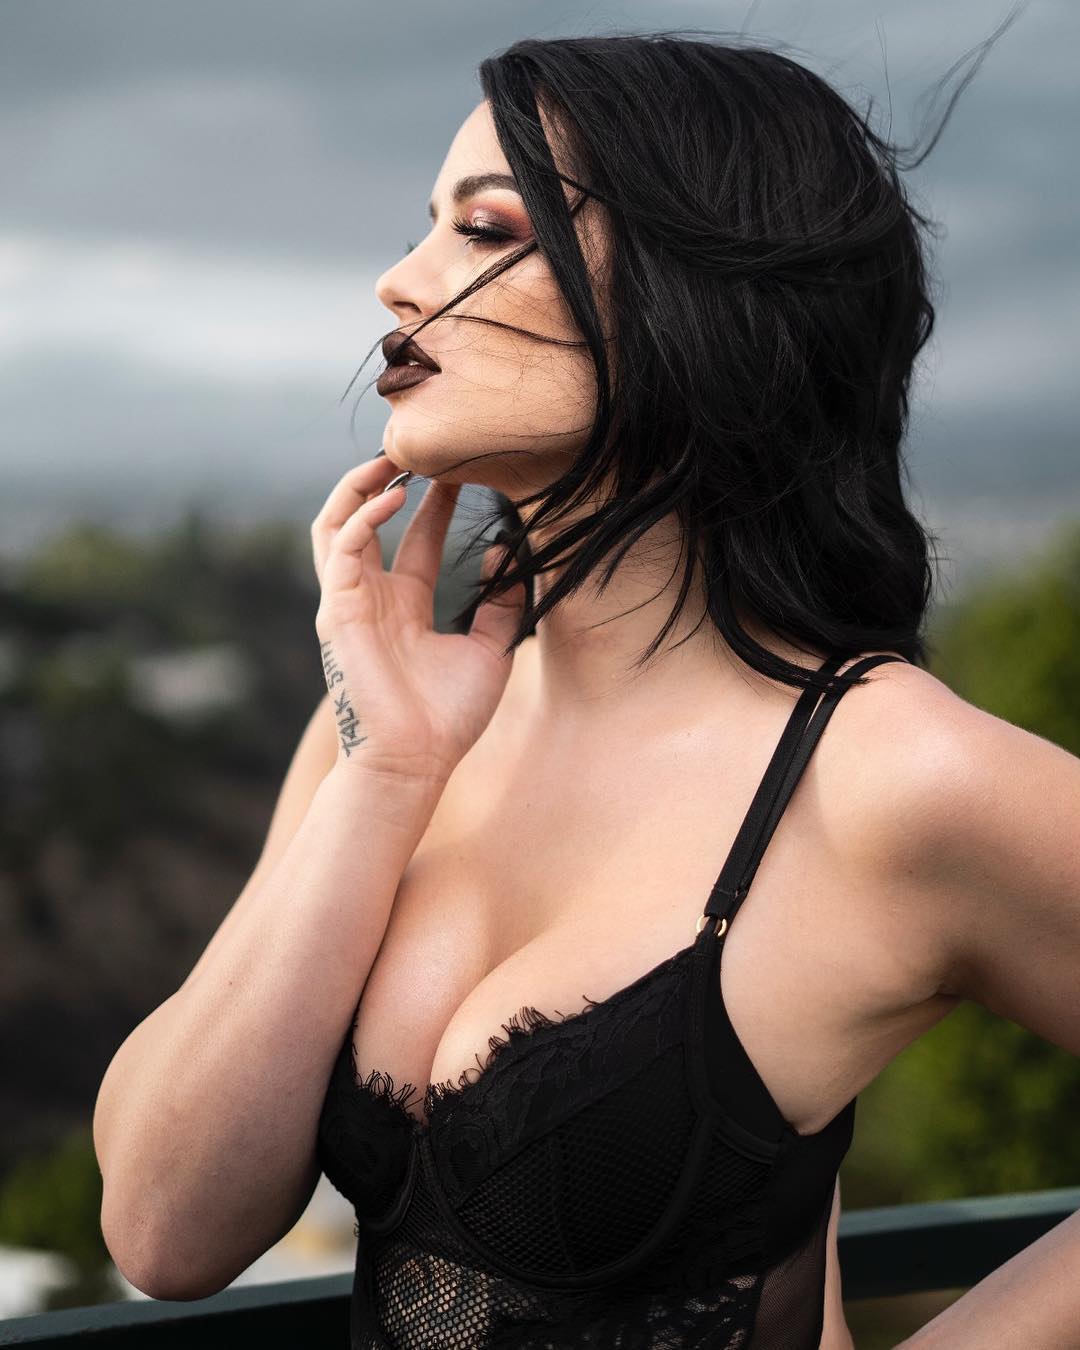 Paige WWE boobs exposed